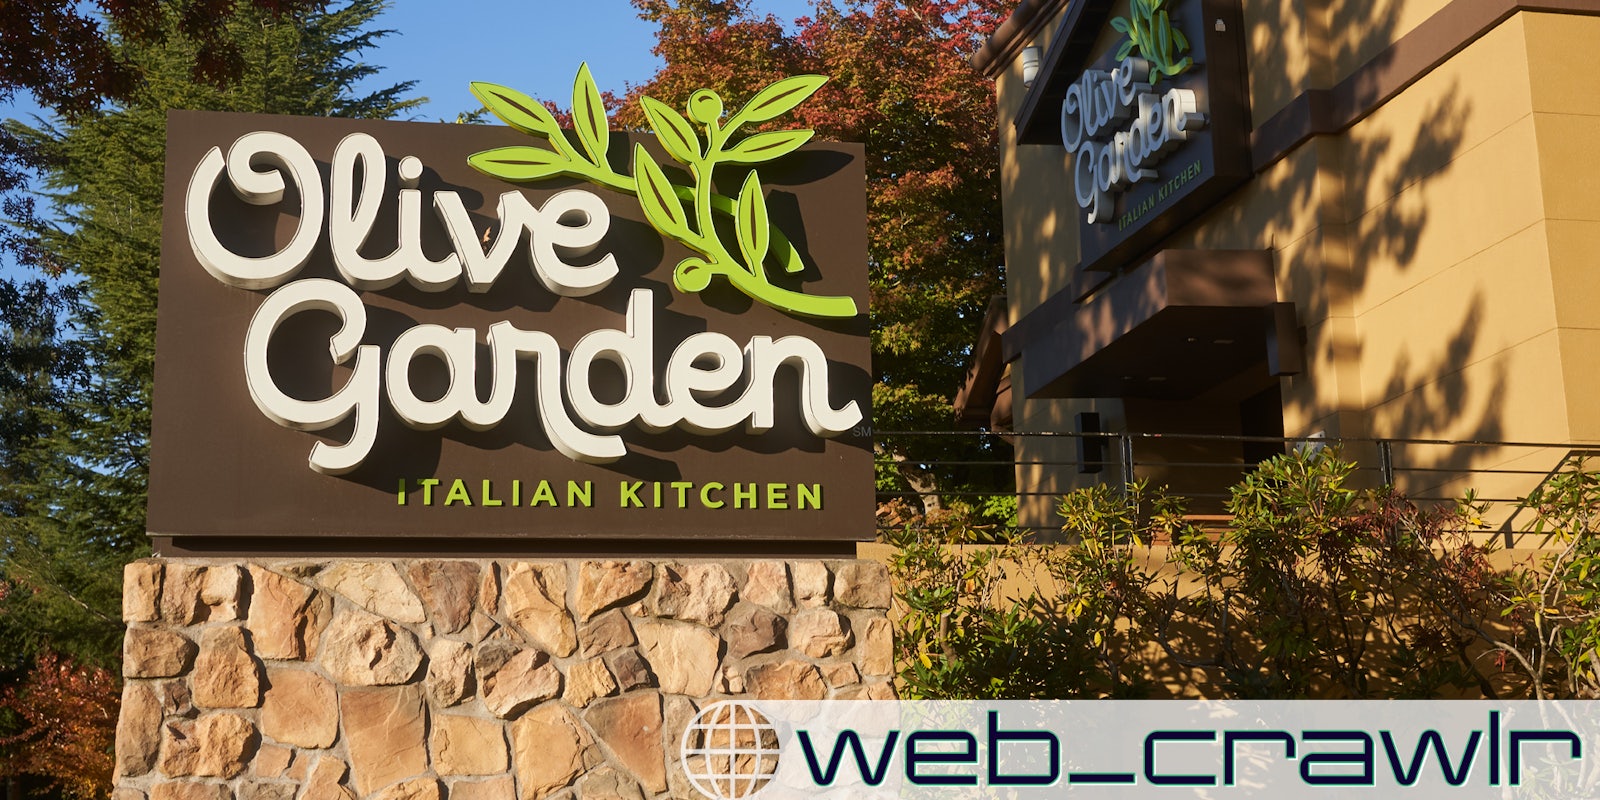 An Olive Garden sign. The Daily Dot newsletter web_crawlr logo is in the bottom right corner.